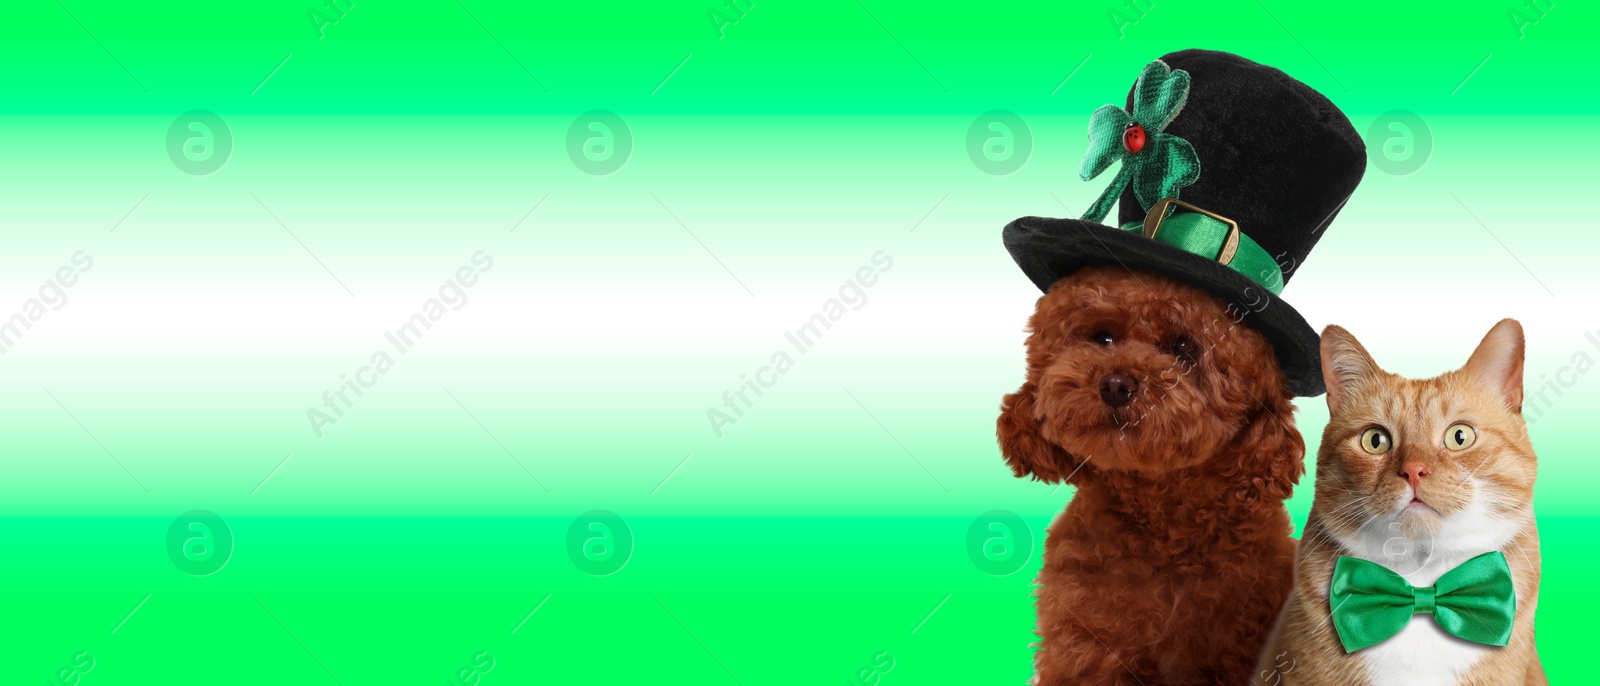 Image of St. Patrick's day celebration. Cute dog in leprechaun hat and cat with bow tie on green background. Banner design with space for text